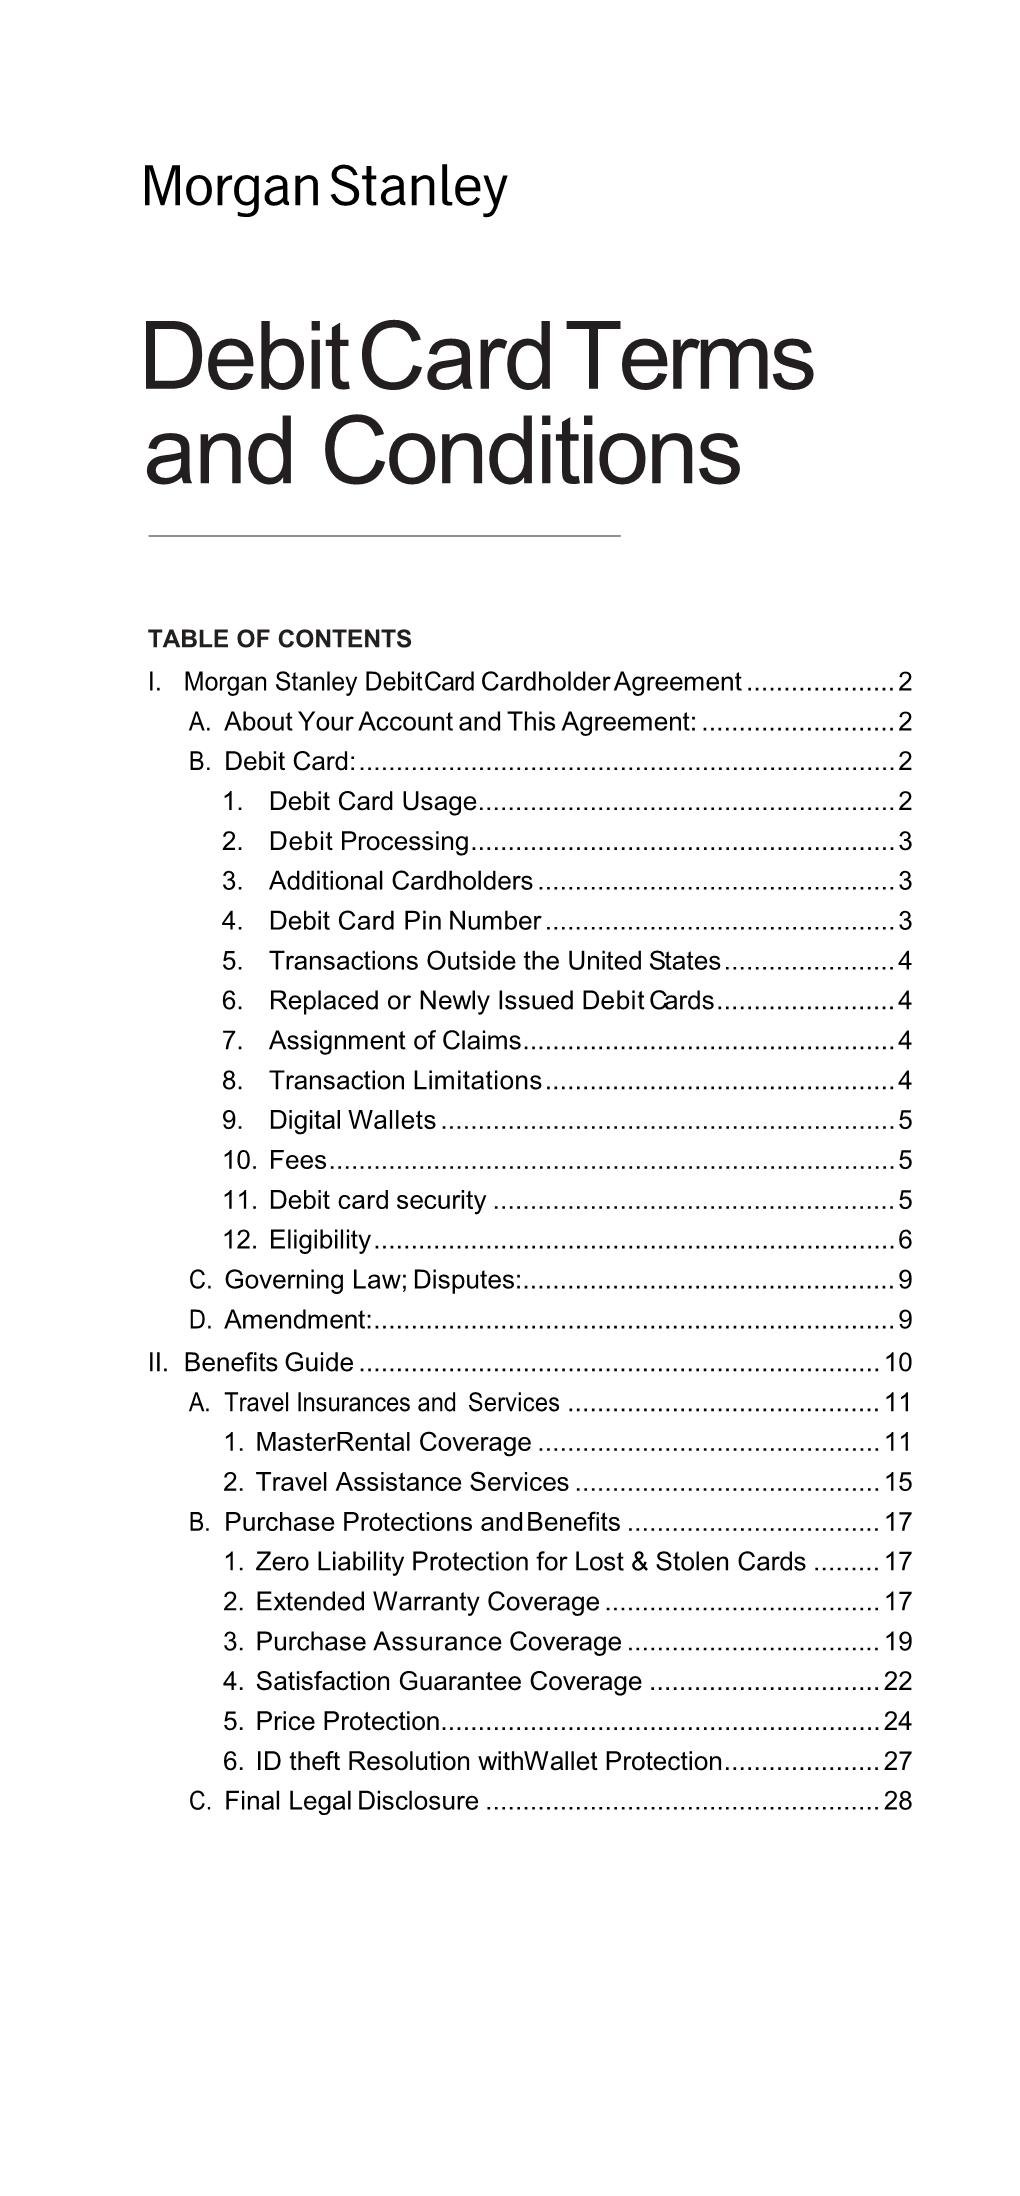 Morgan Stanley Debit Card Terms and Conditions